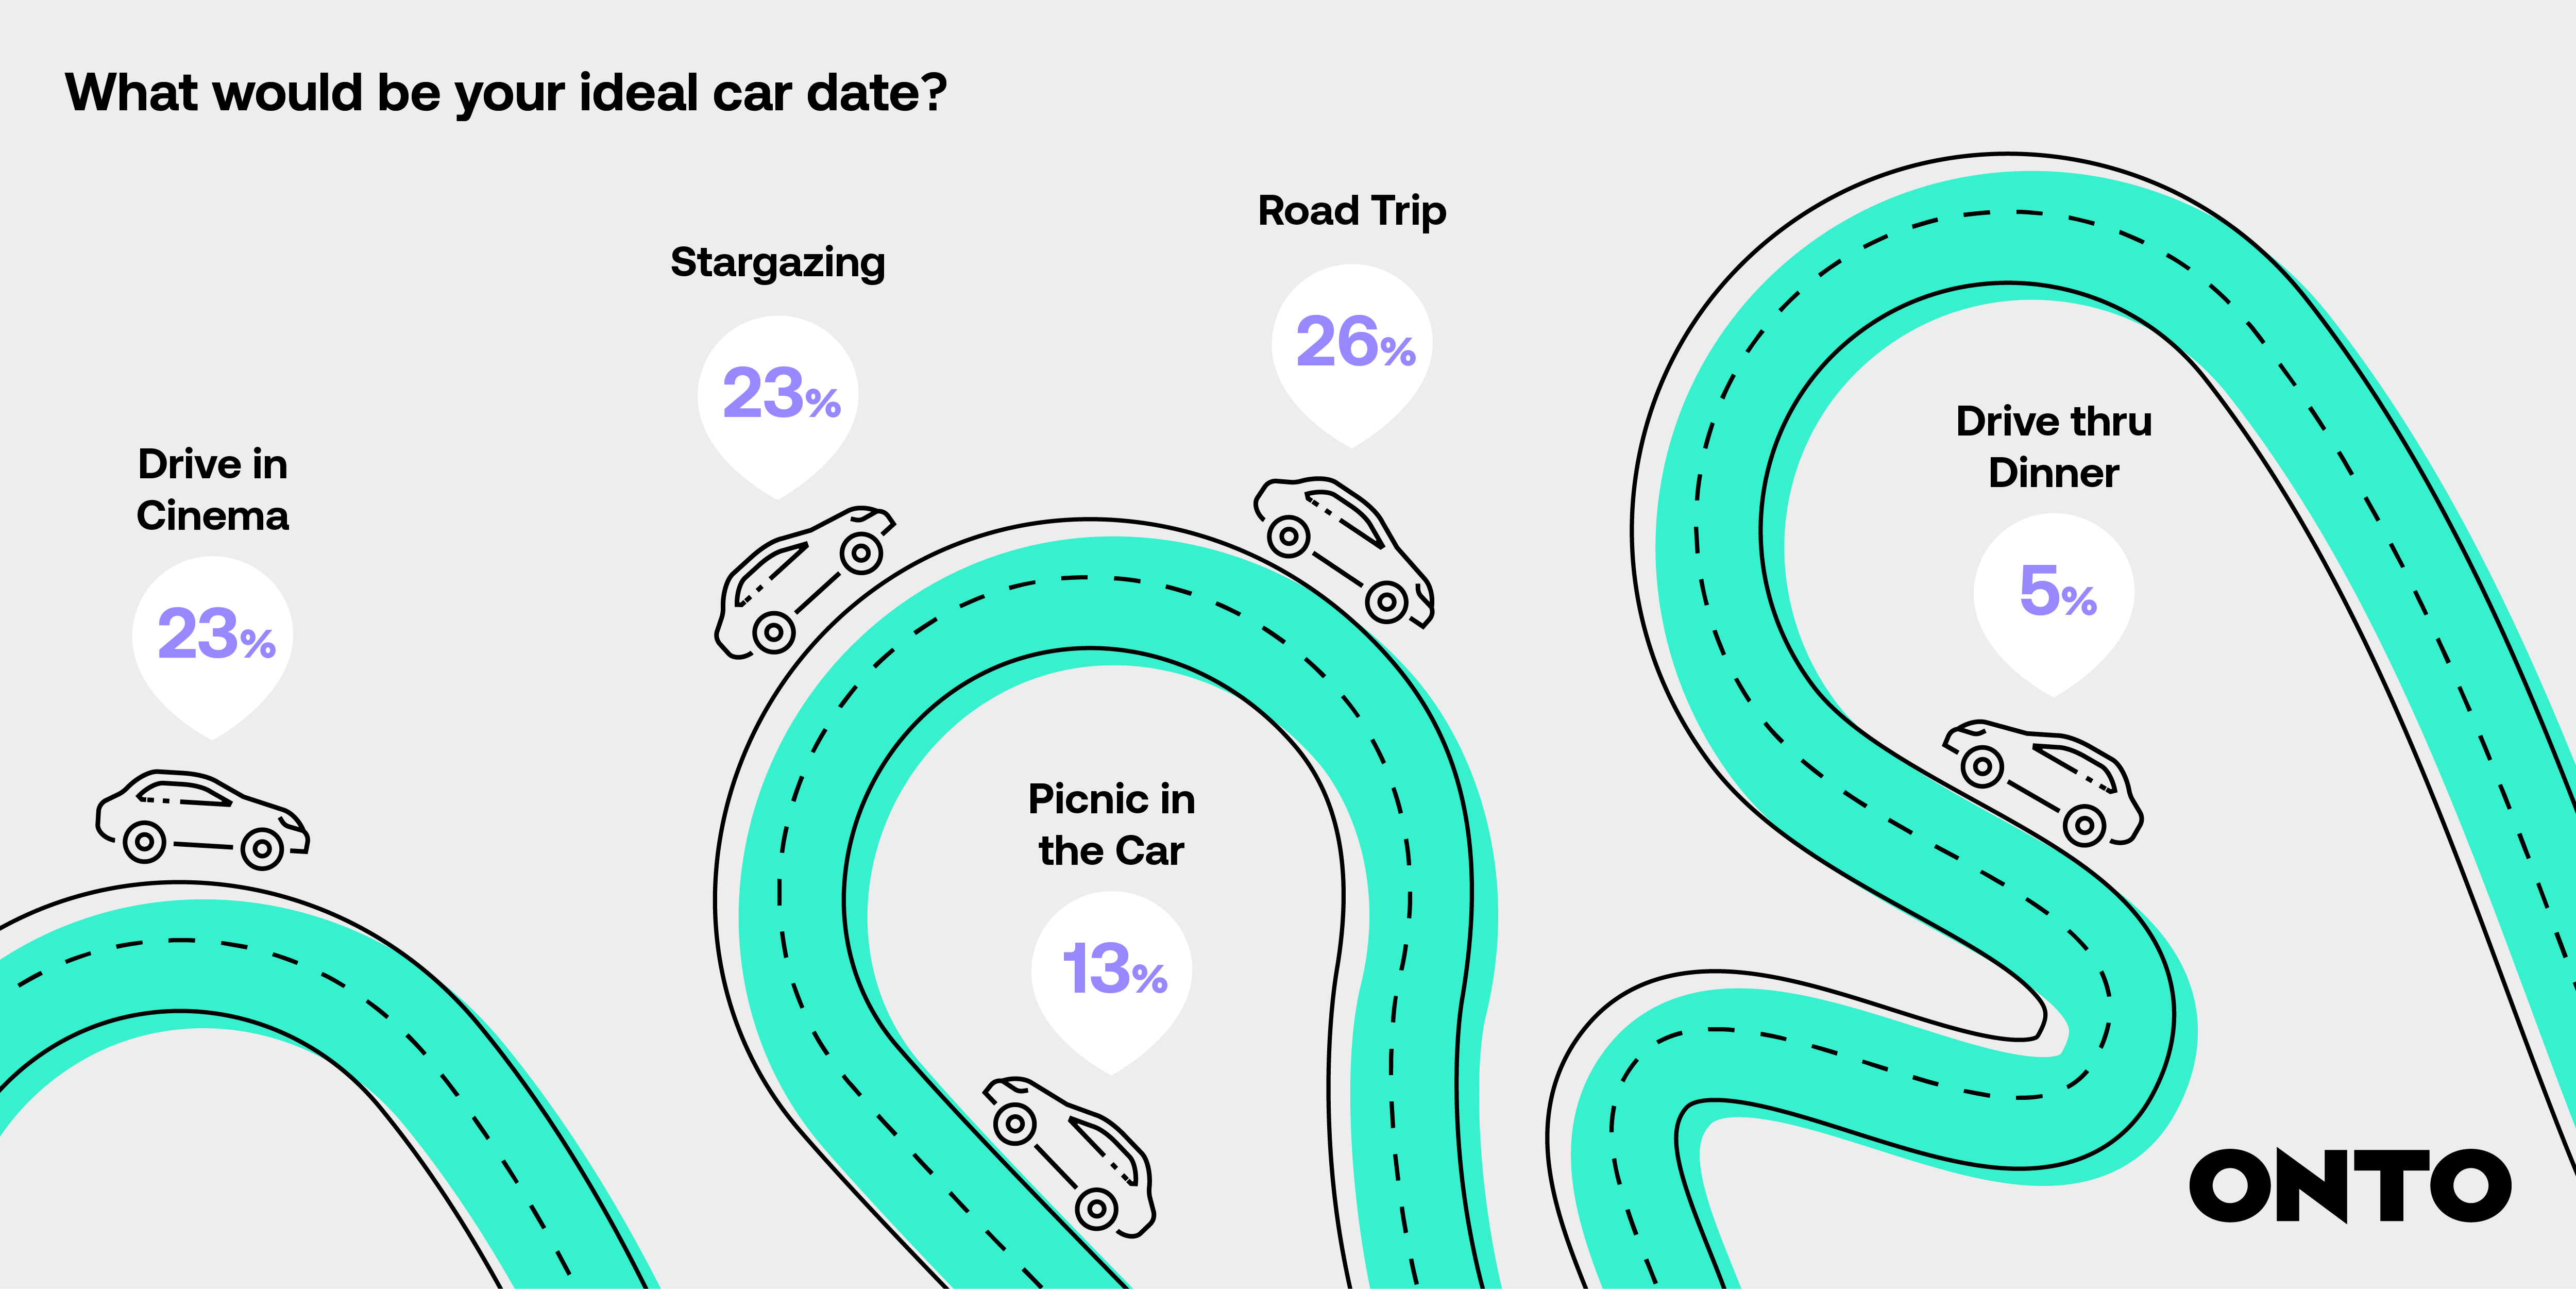 A diagram showing answers to the question, "What would be your ideal car date?". The most popular answer is a road trip with 26% of the total responses.